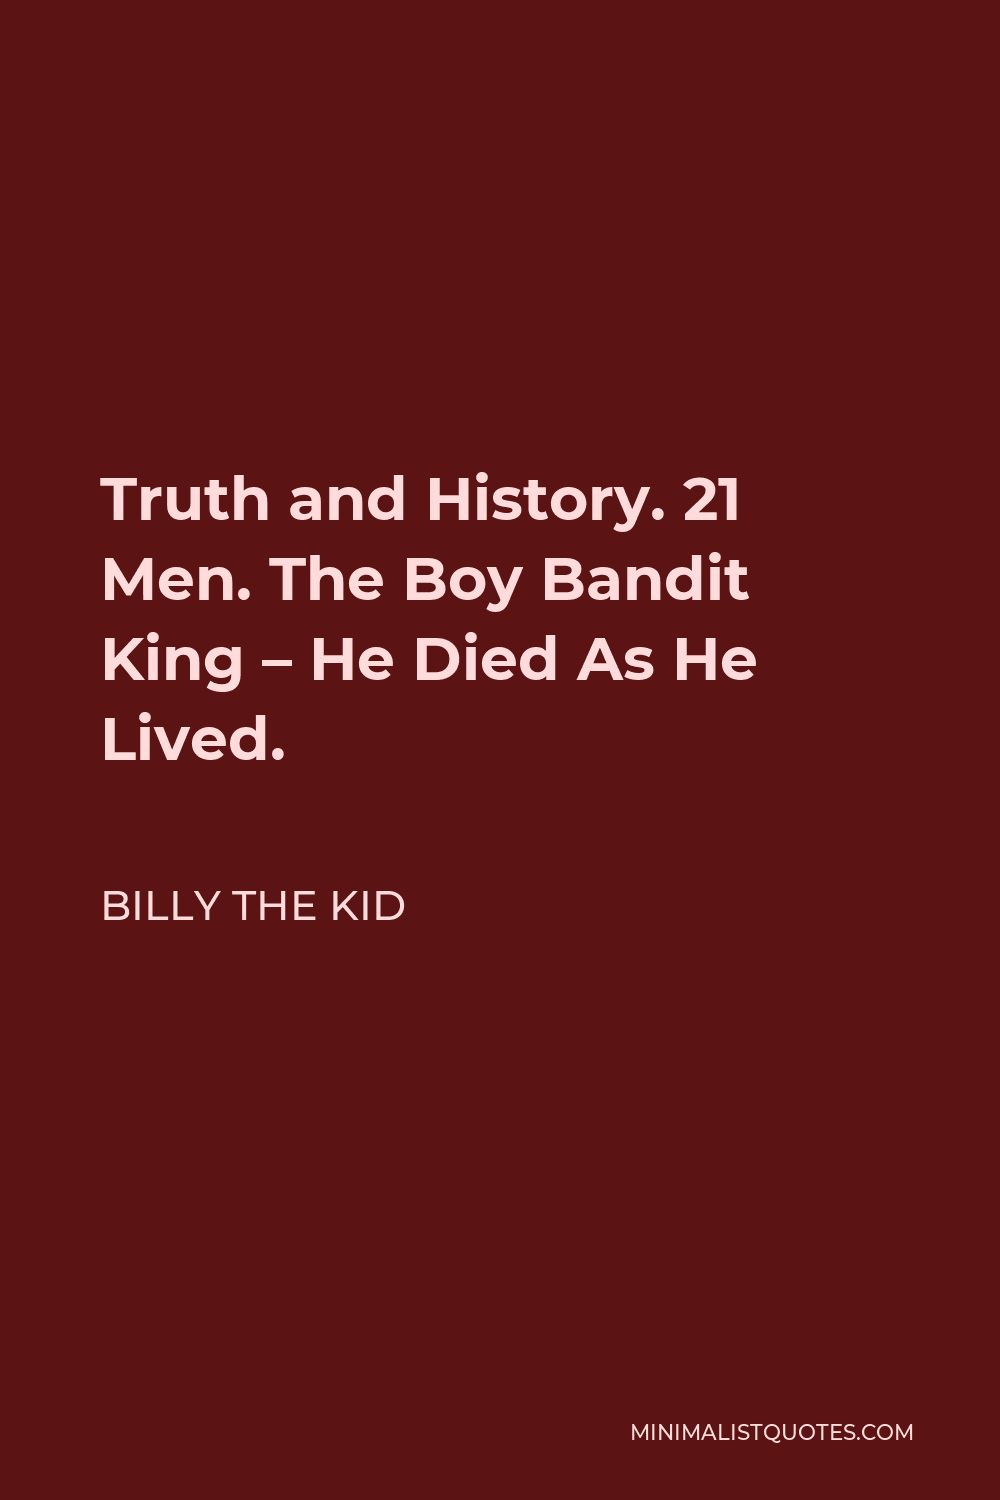 Billy the Kid Quote - Truth and History. 21 Men. The Boy Bandit King – He Died As He Lived.